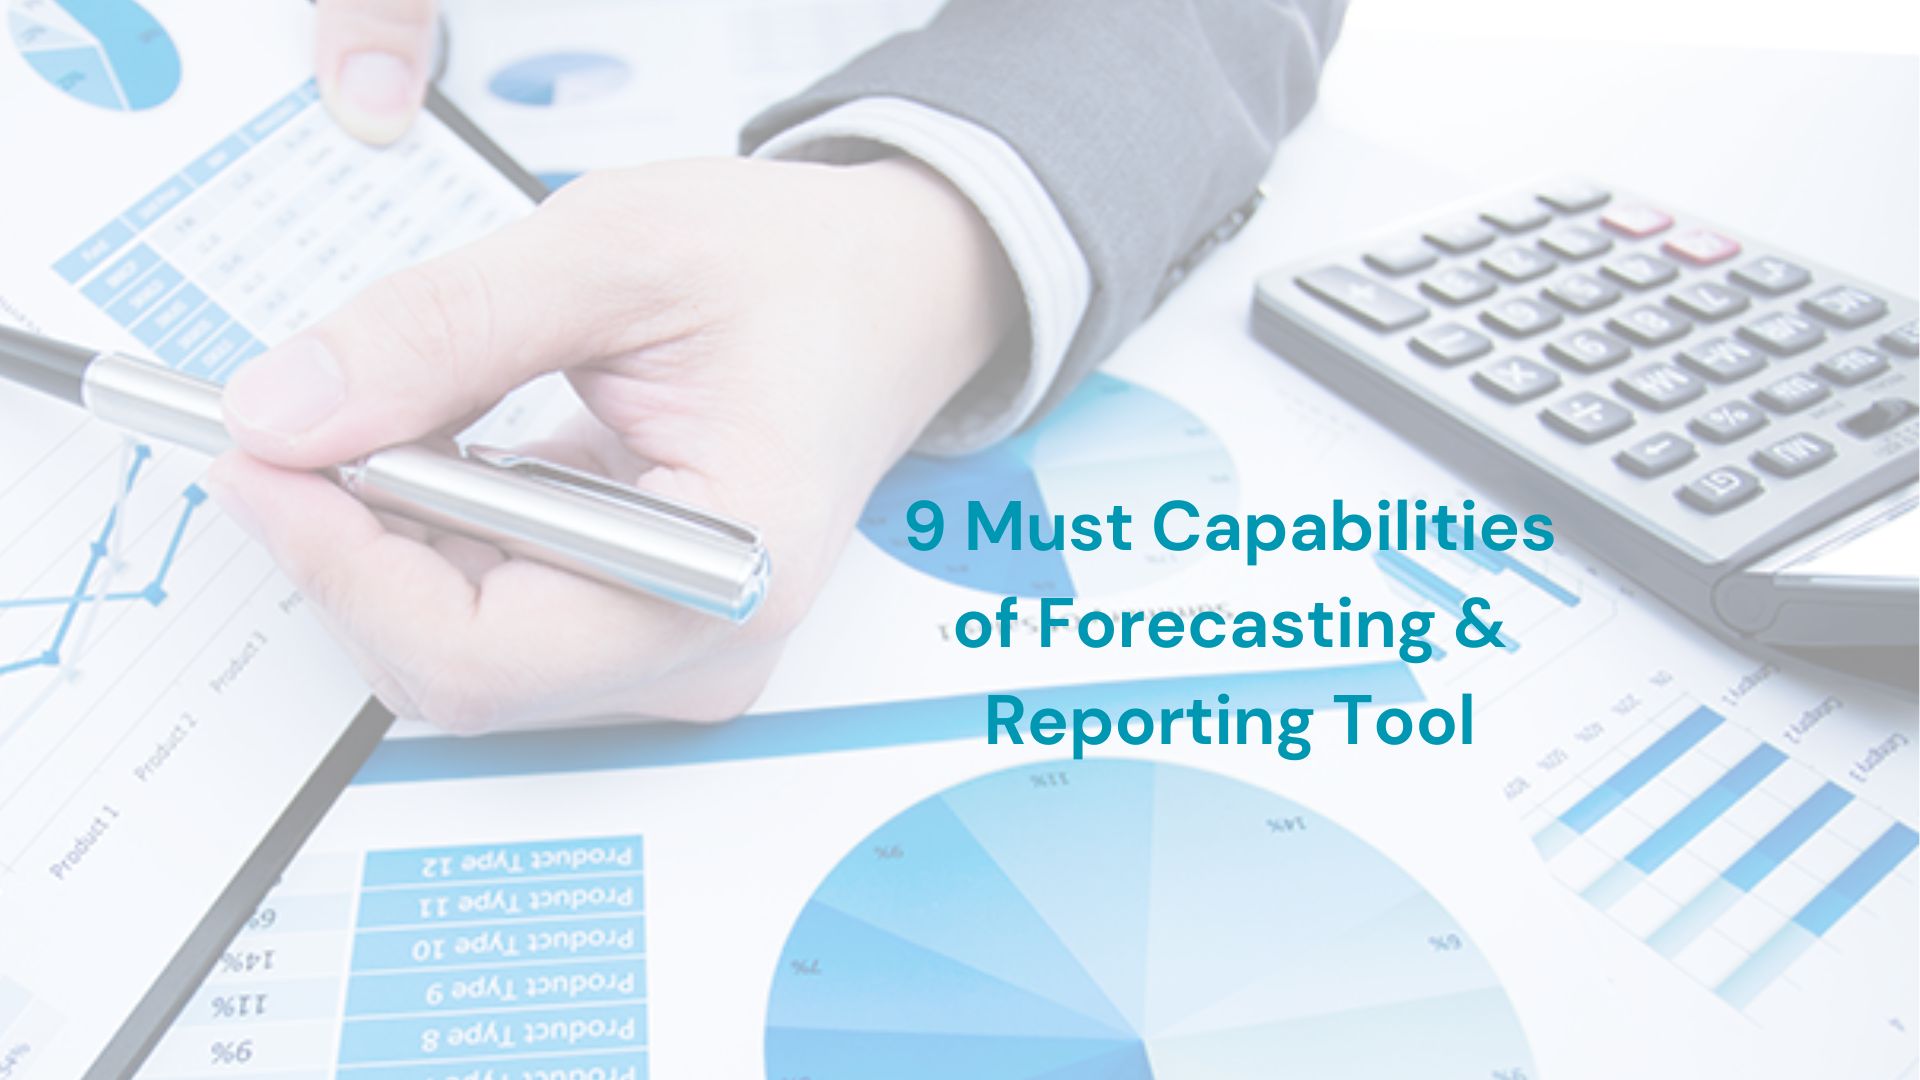 Top 9 capabilities your management reporting and forecasting tool must have!